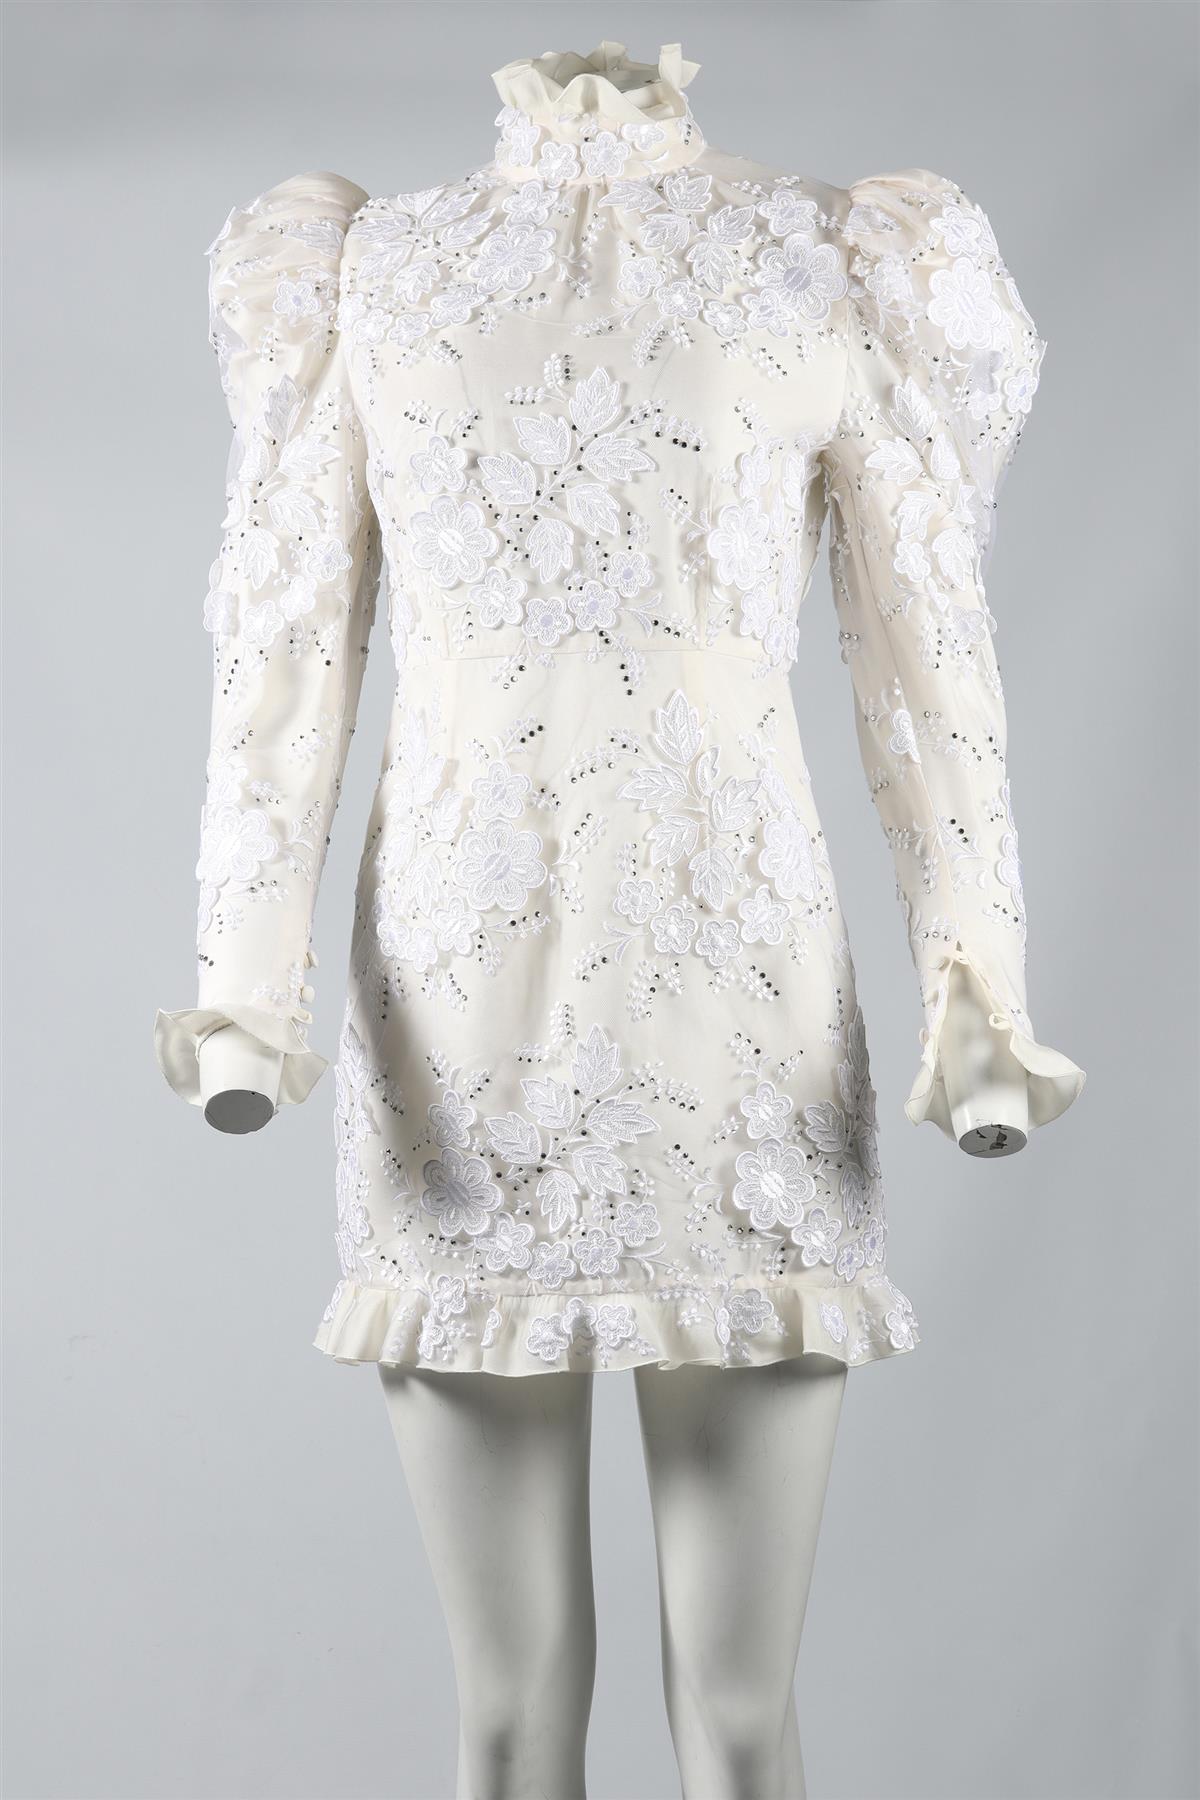 ALESSABDRA RICH CRYSTAL AND LACE MINI DRESS IT 40 UK 8